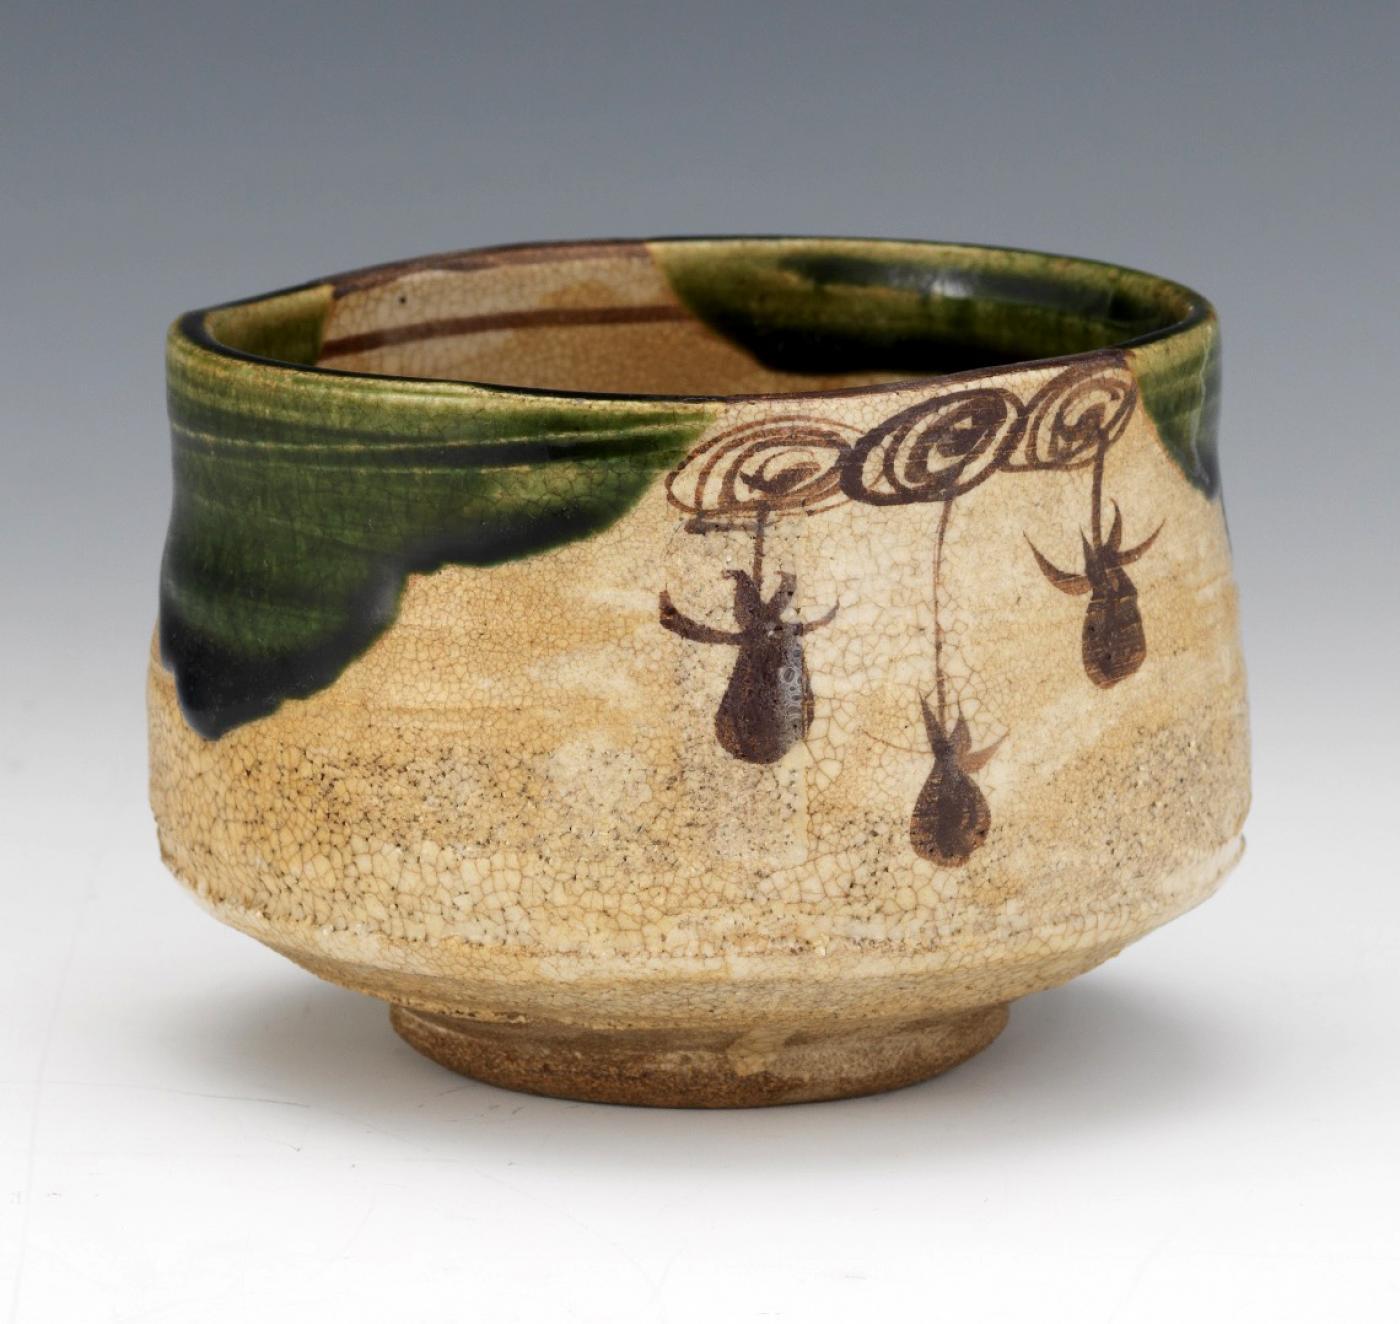 A Japanese ceramic tea bowl known as chawan potted in the E-Oribe style (painted Oribe). Oribe is a Sub type of high-fired Mino wares produced in the Seto and Mino areas of Gifu Prefecture in Japan. Mino ware was originated in the late 16th century